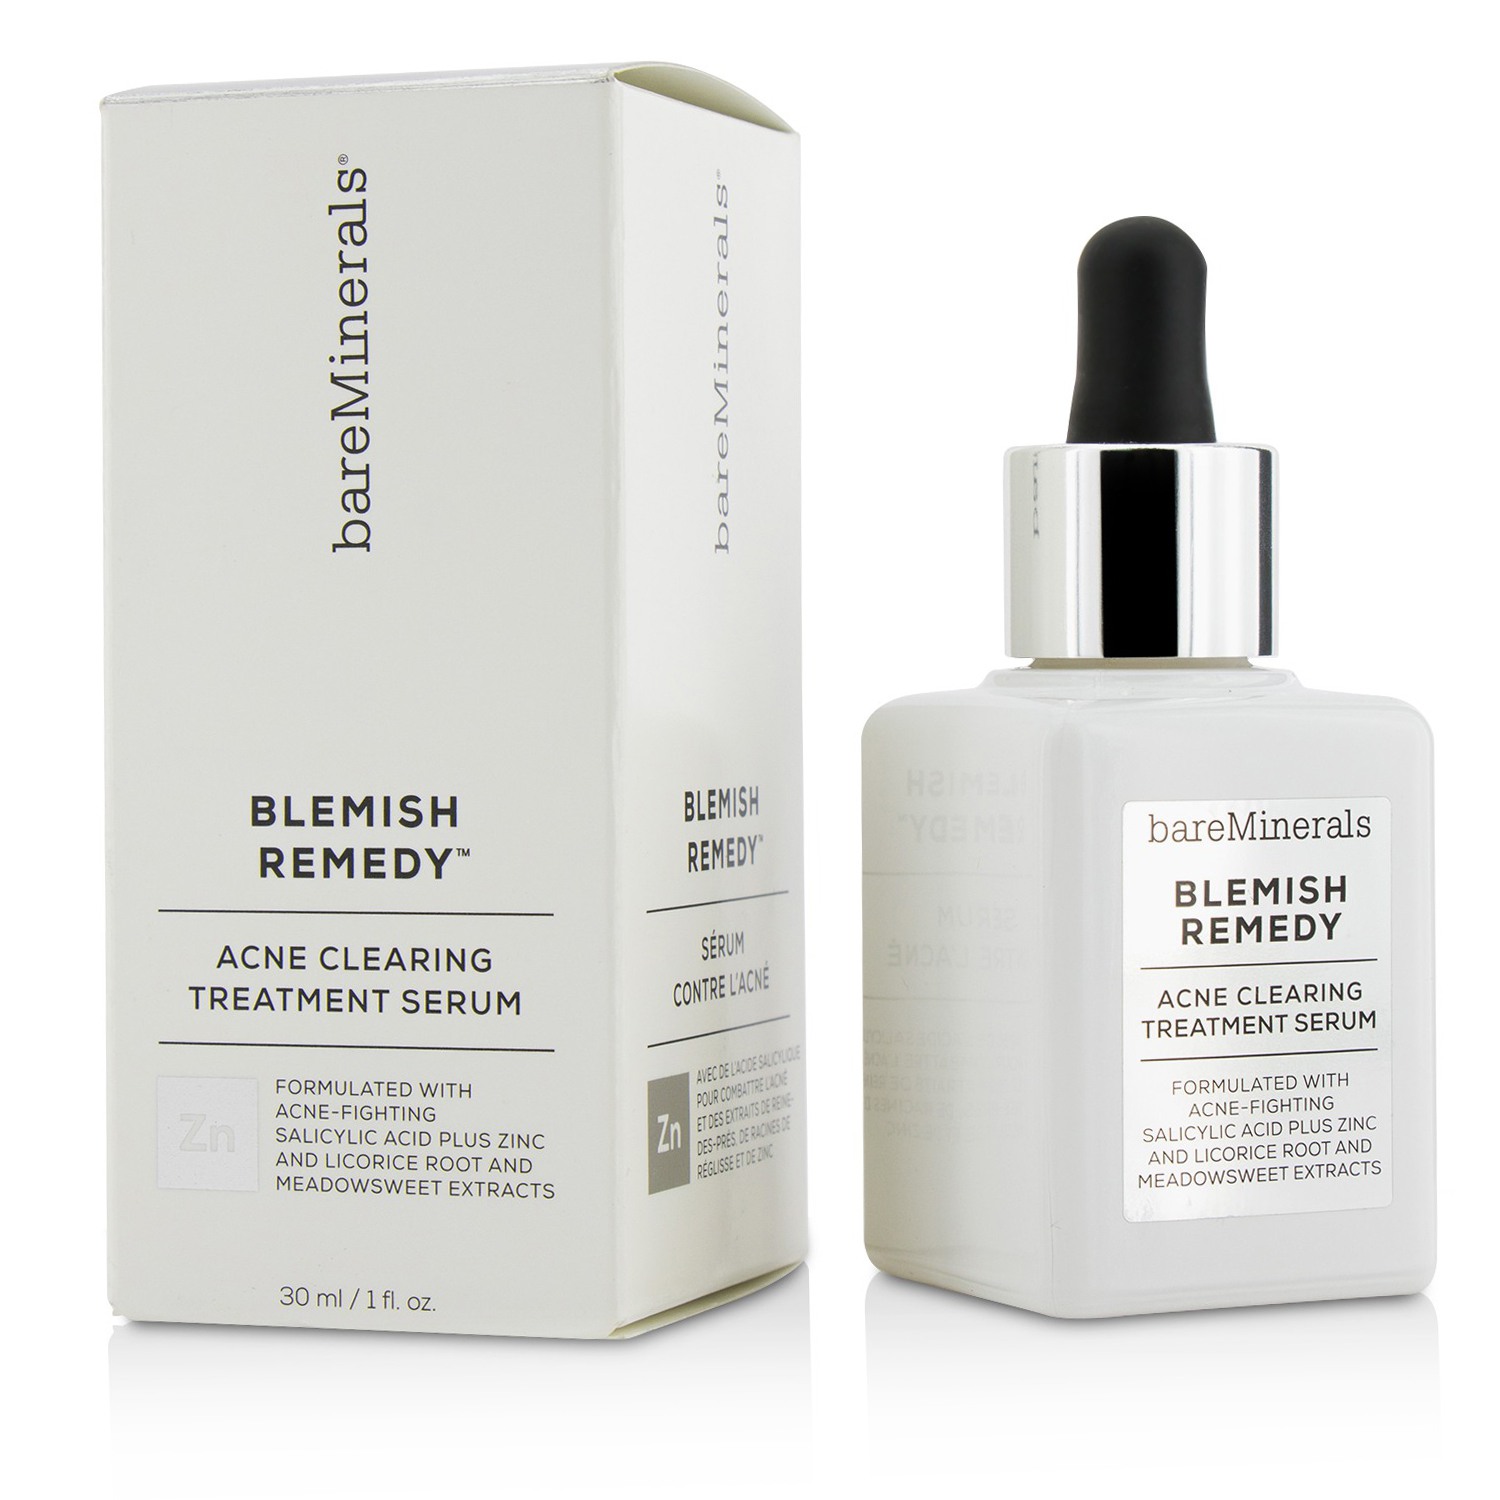 Blemish Remedy Acne Clearing Treatment Serum (Exp. Date: 05/2018) BareMinerals Image